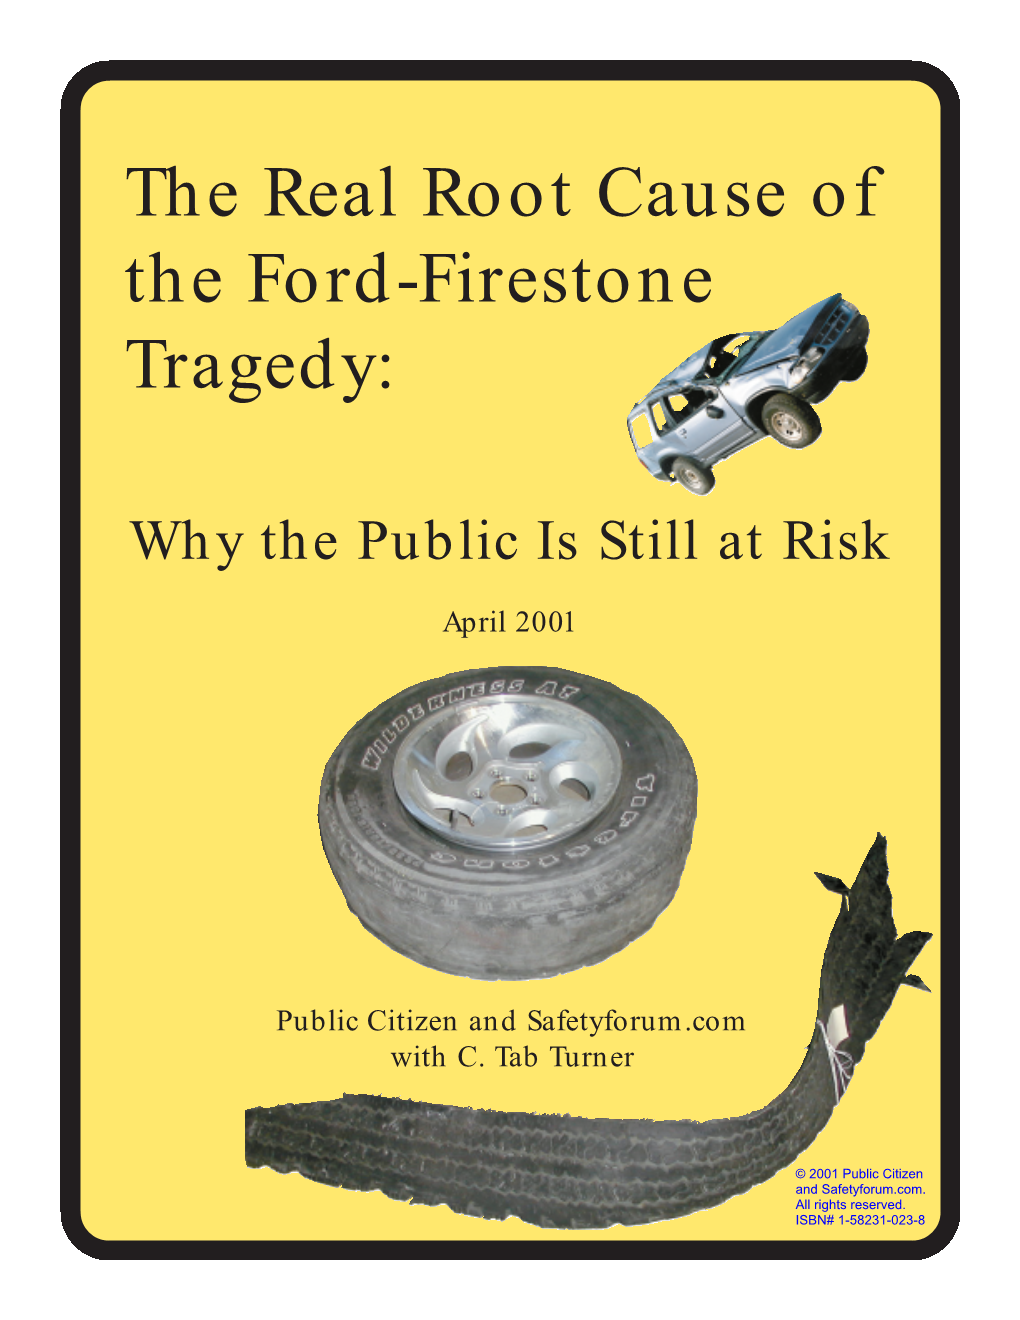 The Real Root Cause of the Ford-Firestone Tragedy